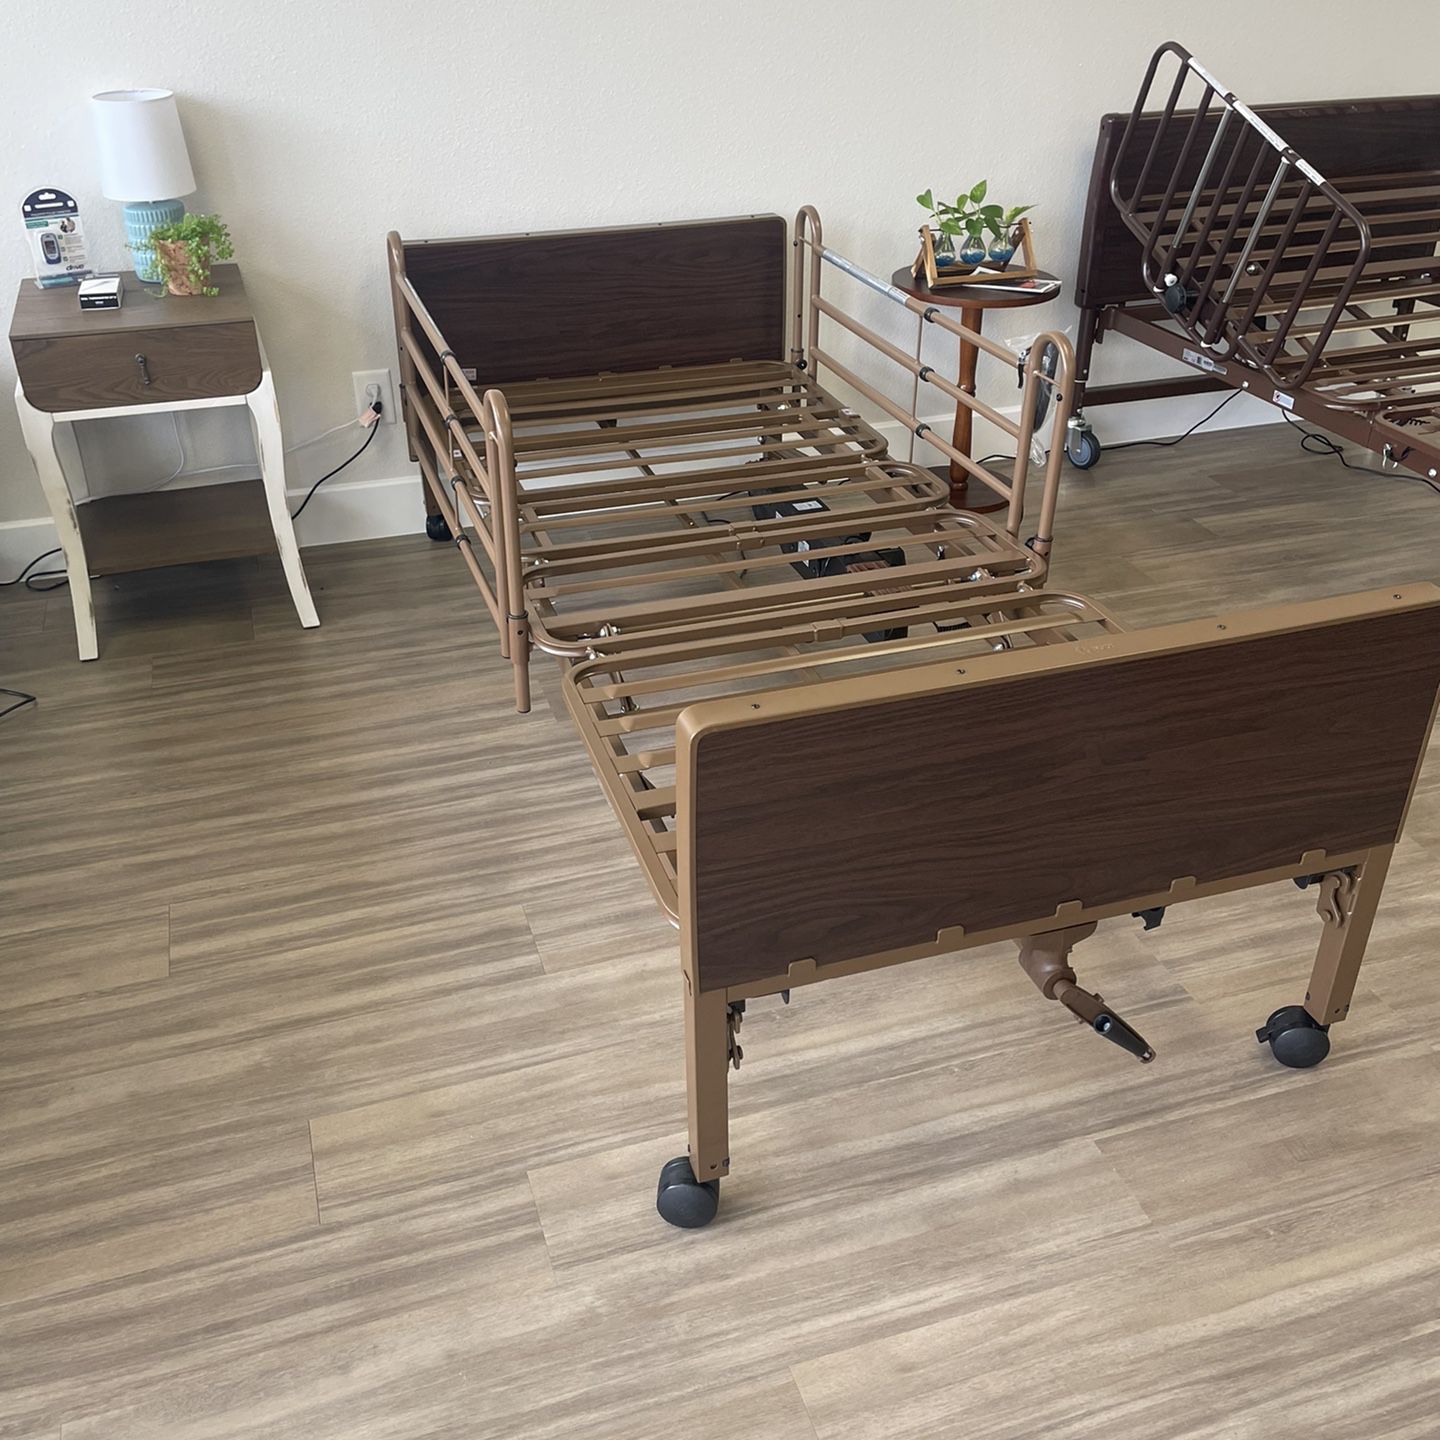 BRAND NEW- Semi electric hospital bed 